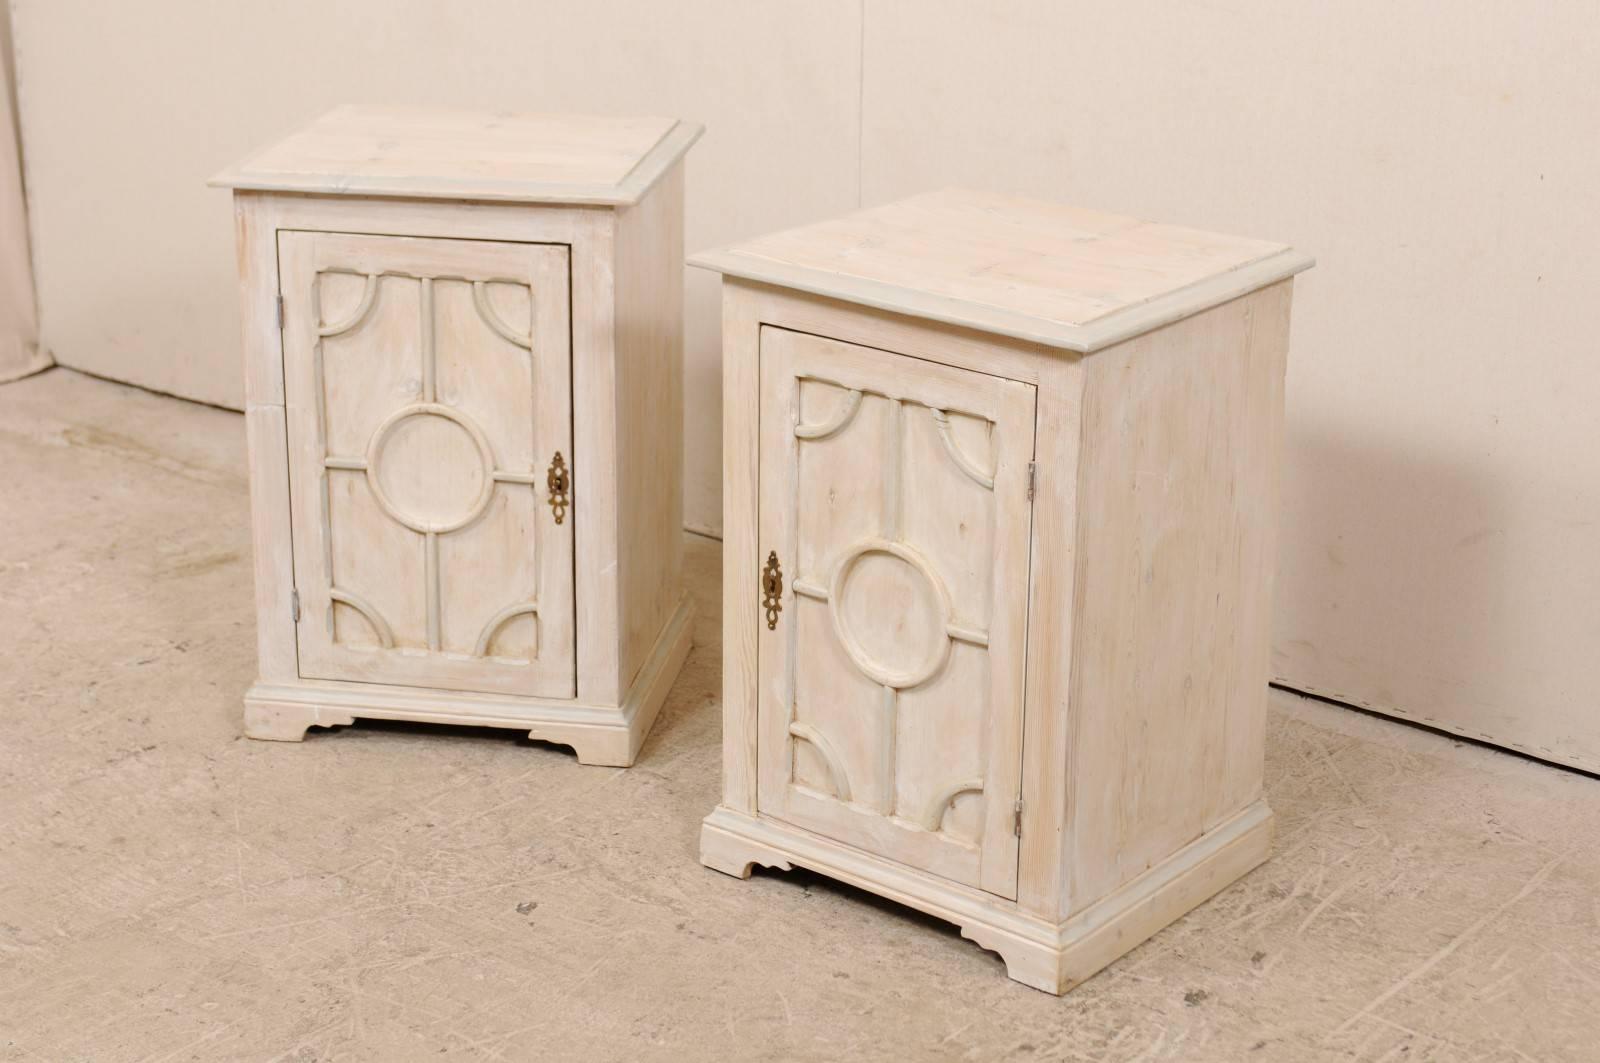 Pair of English Mid-20th Century Painted Wood Side Tables with Understated Trim 1